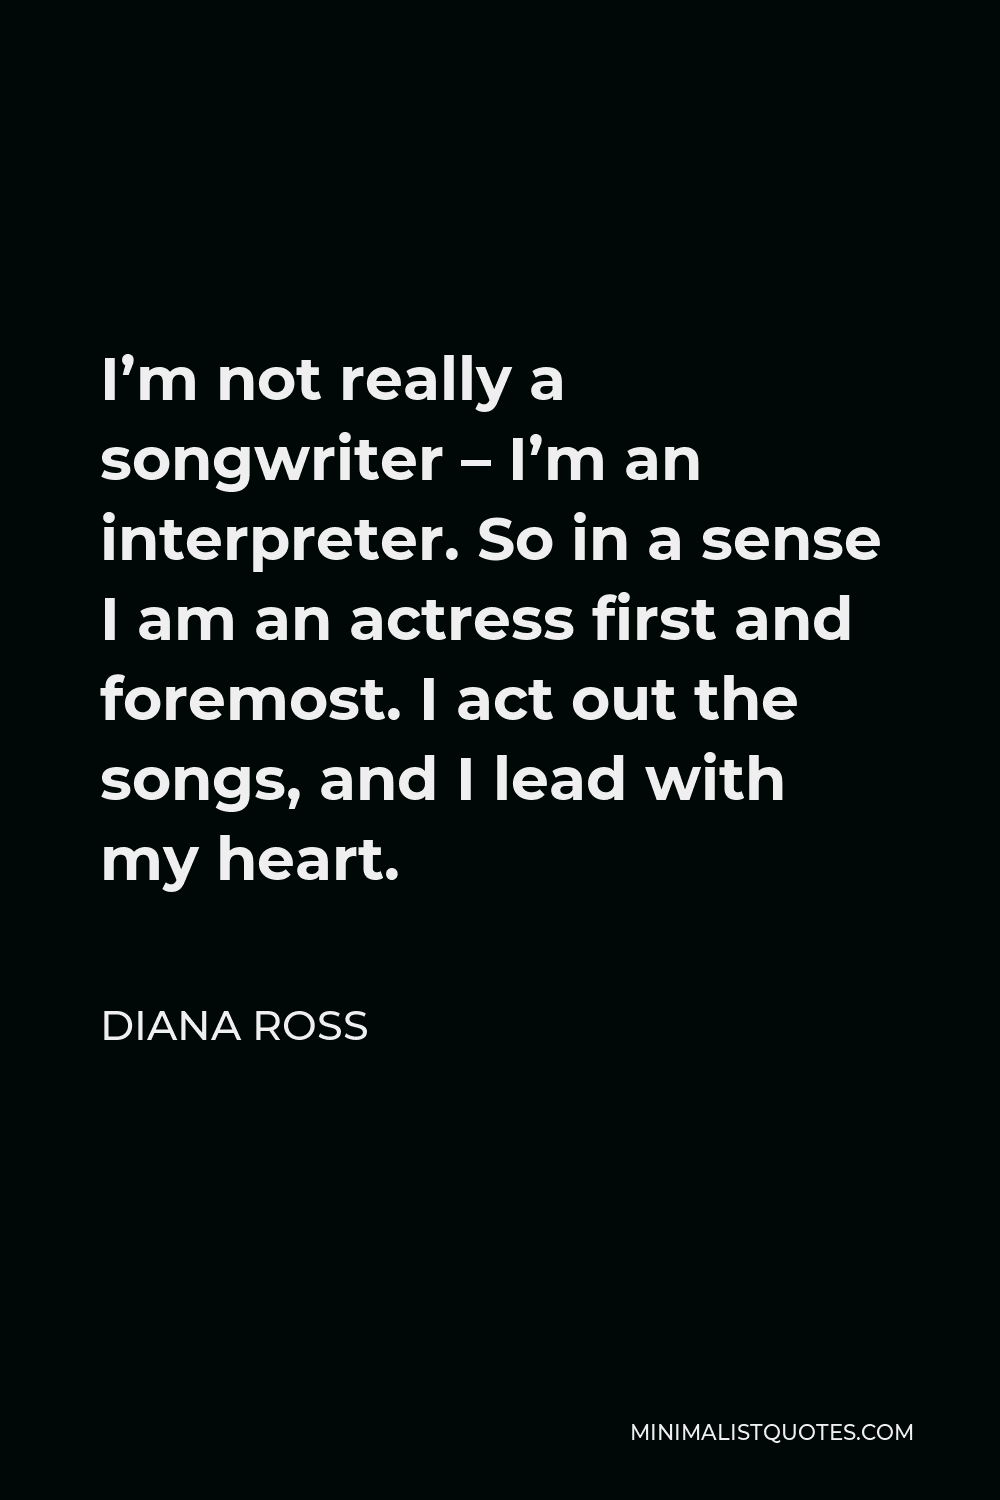 Diana Ross Quote - I’m not really a songwriter – I’m an interpreter. So in a sense I am an actress first and foremost. I act out the songs, and I lead with my heart.